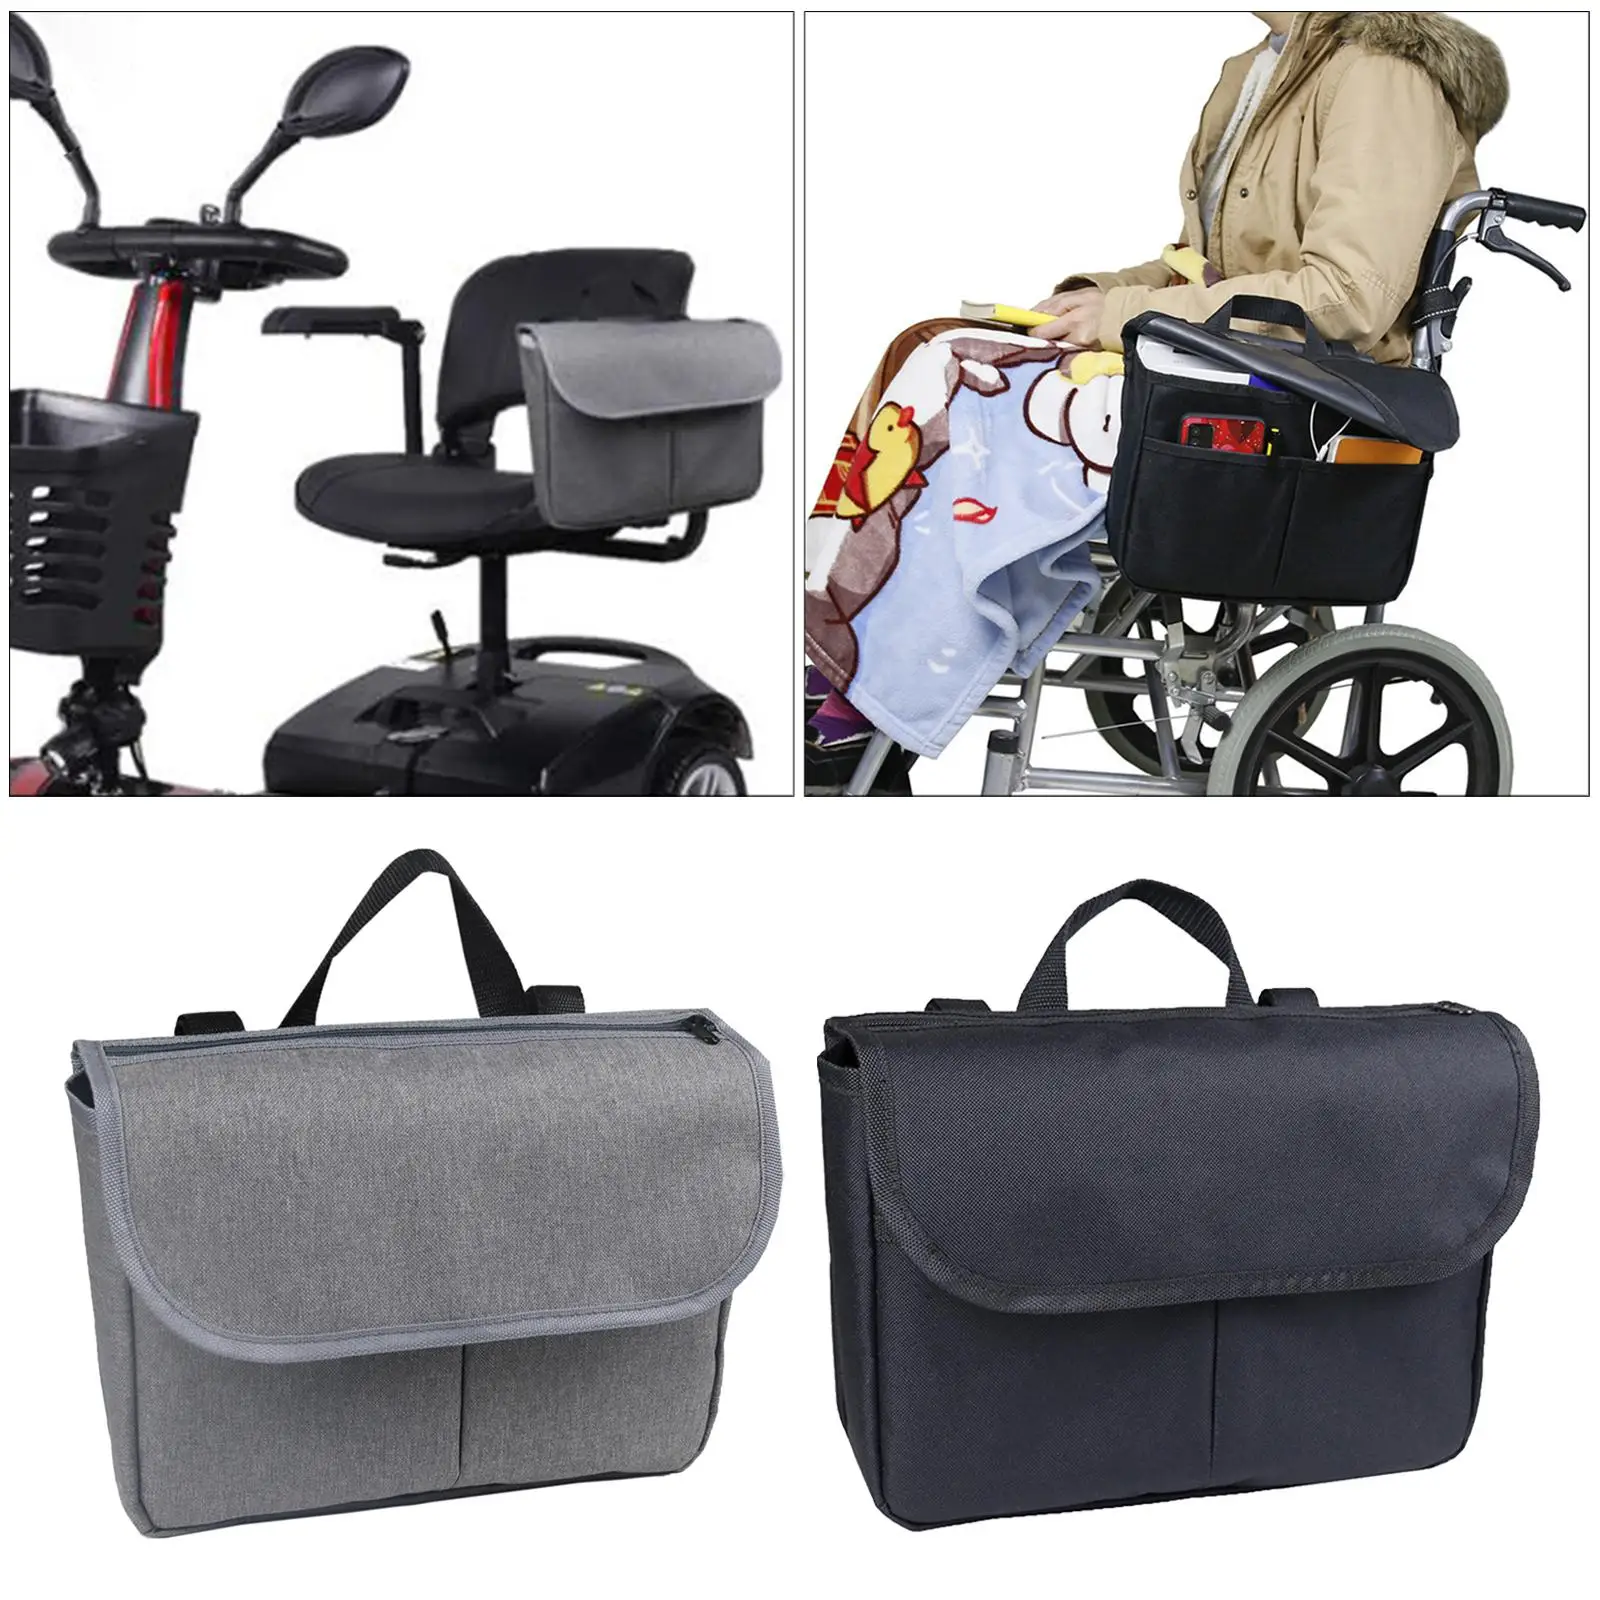 Wheelchair Side Bag Armrest Pouch Organizer Bag Phone Pocket for Electric, Manual or Powered Chairs